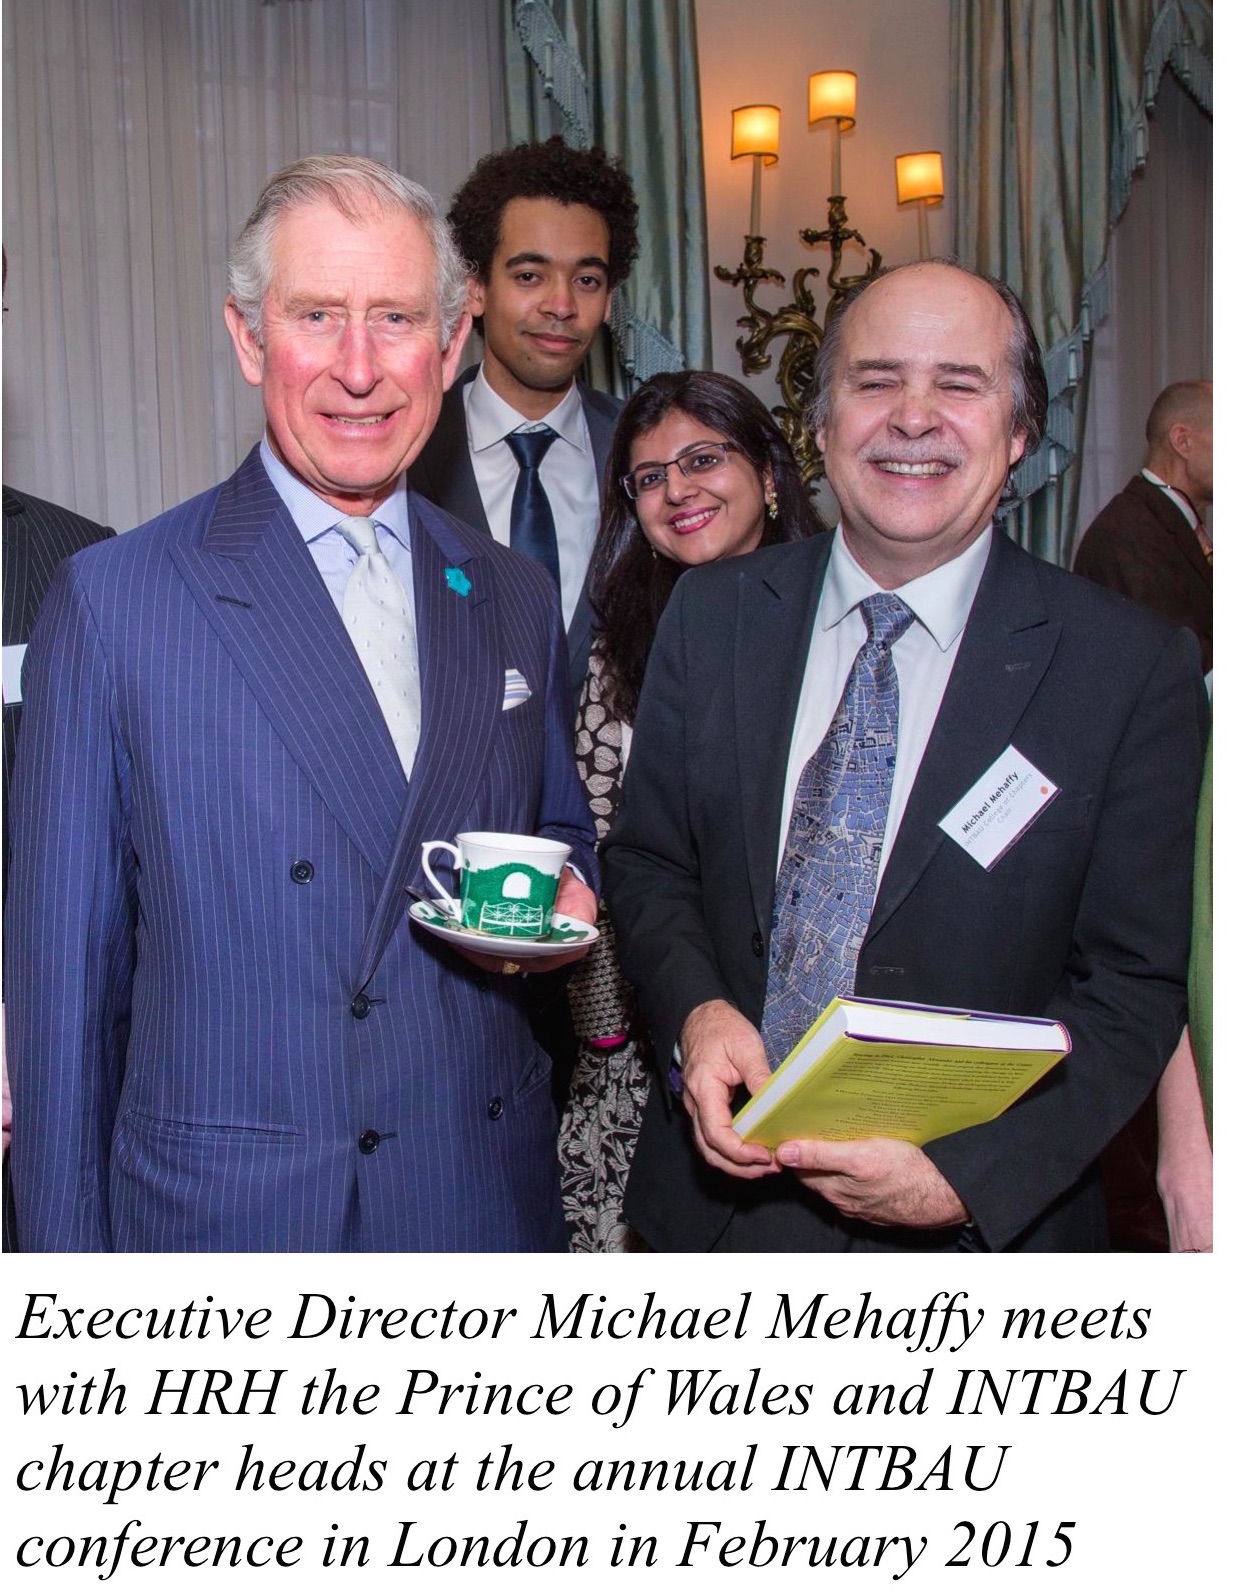 Michael Mehaffy meets with HRH the Prince of Wales